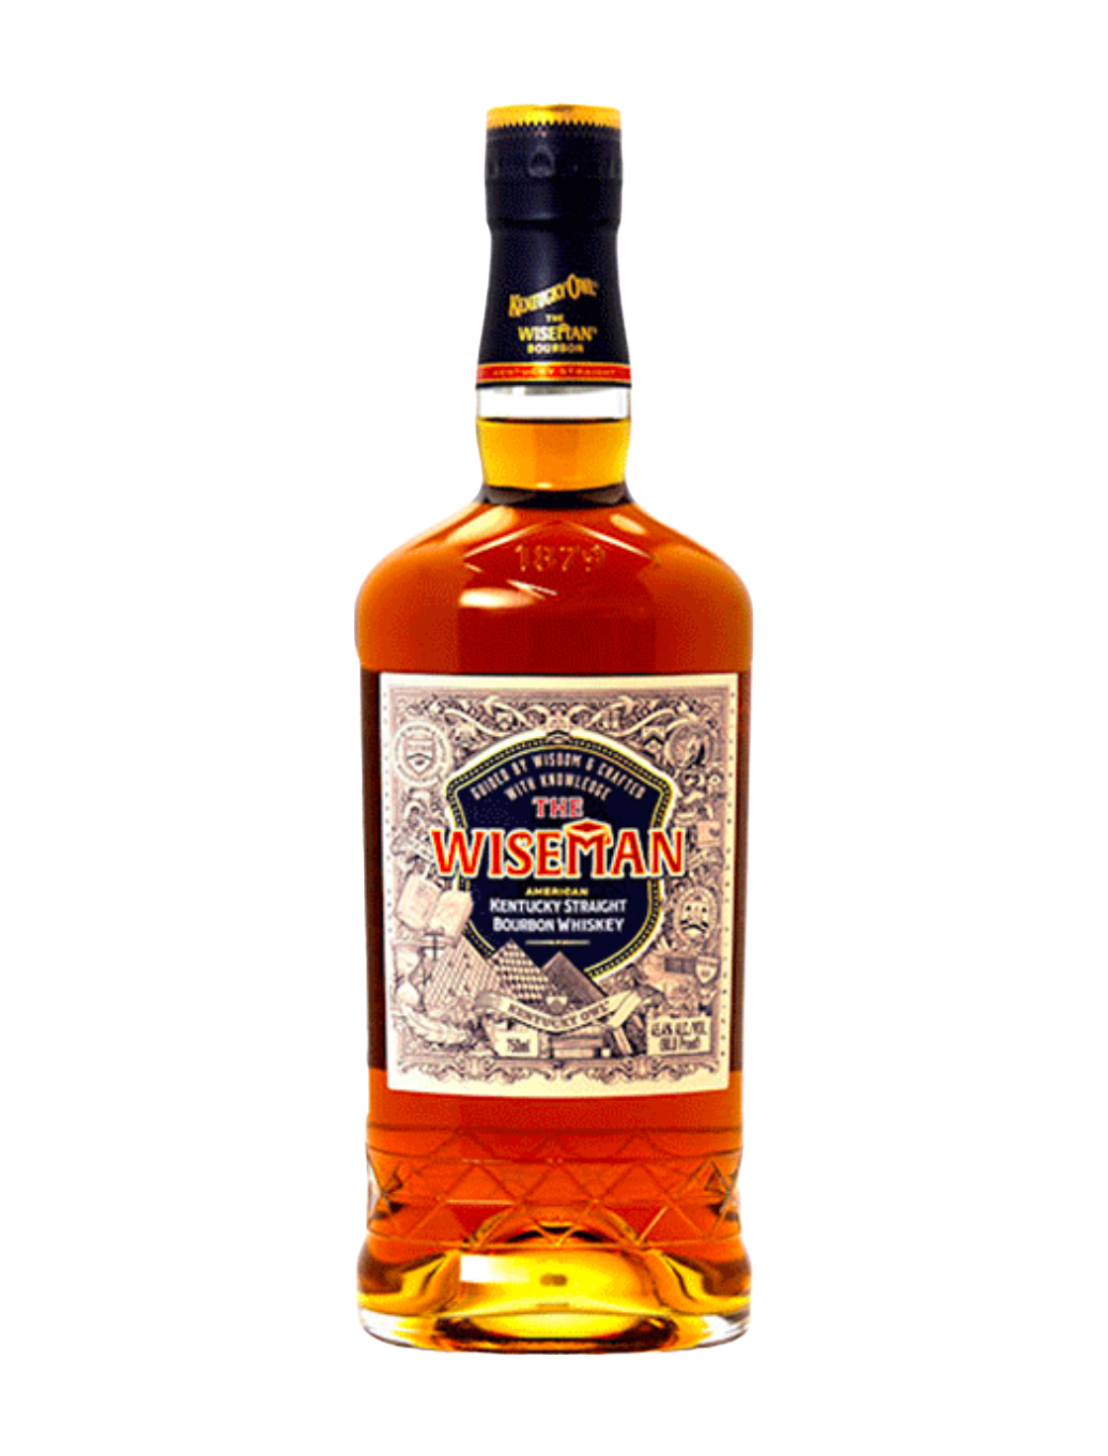 An elegant bottle of The Kentucky Owl The Wiseman Kentucky Straight Bourbon Whiskey in front of a plain white background